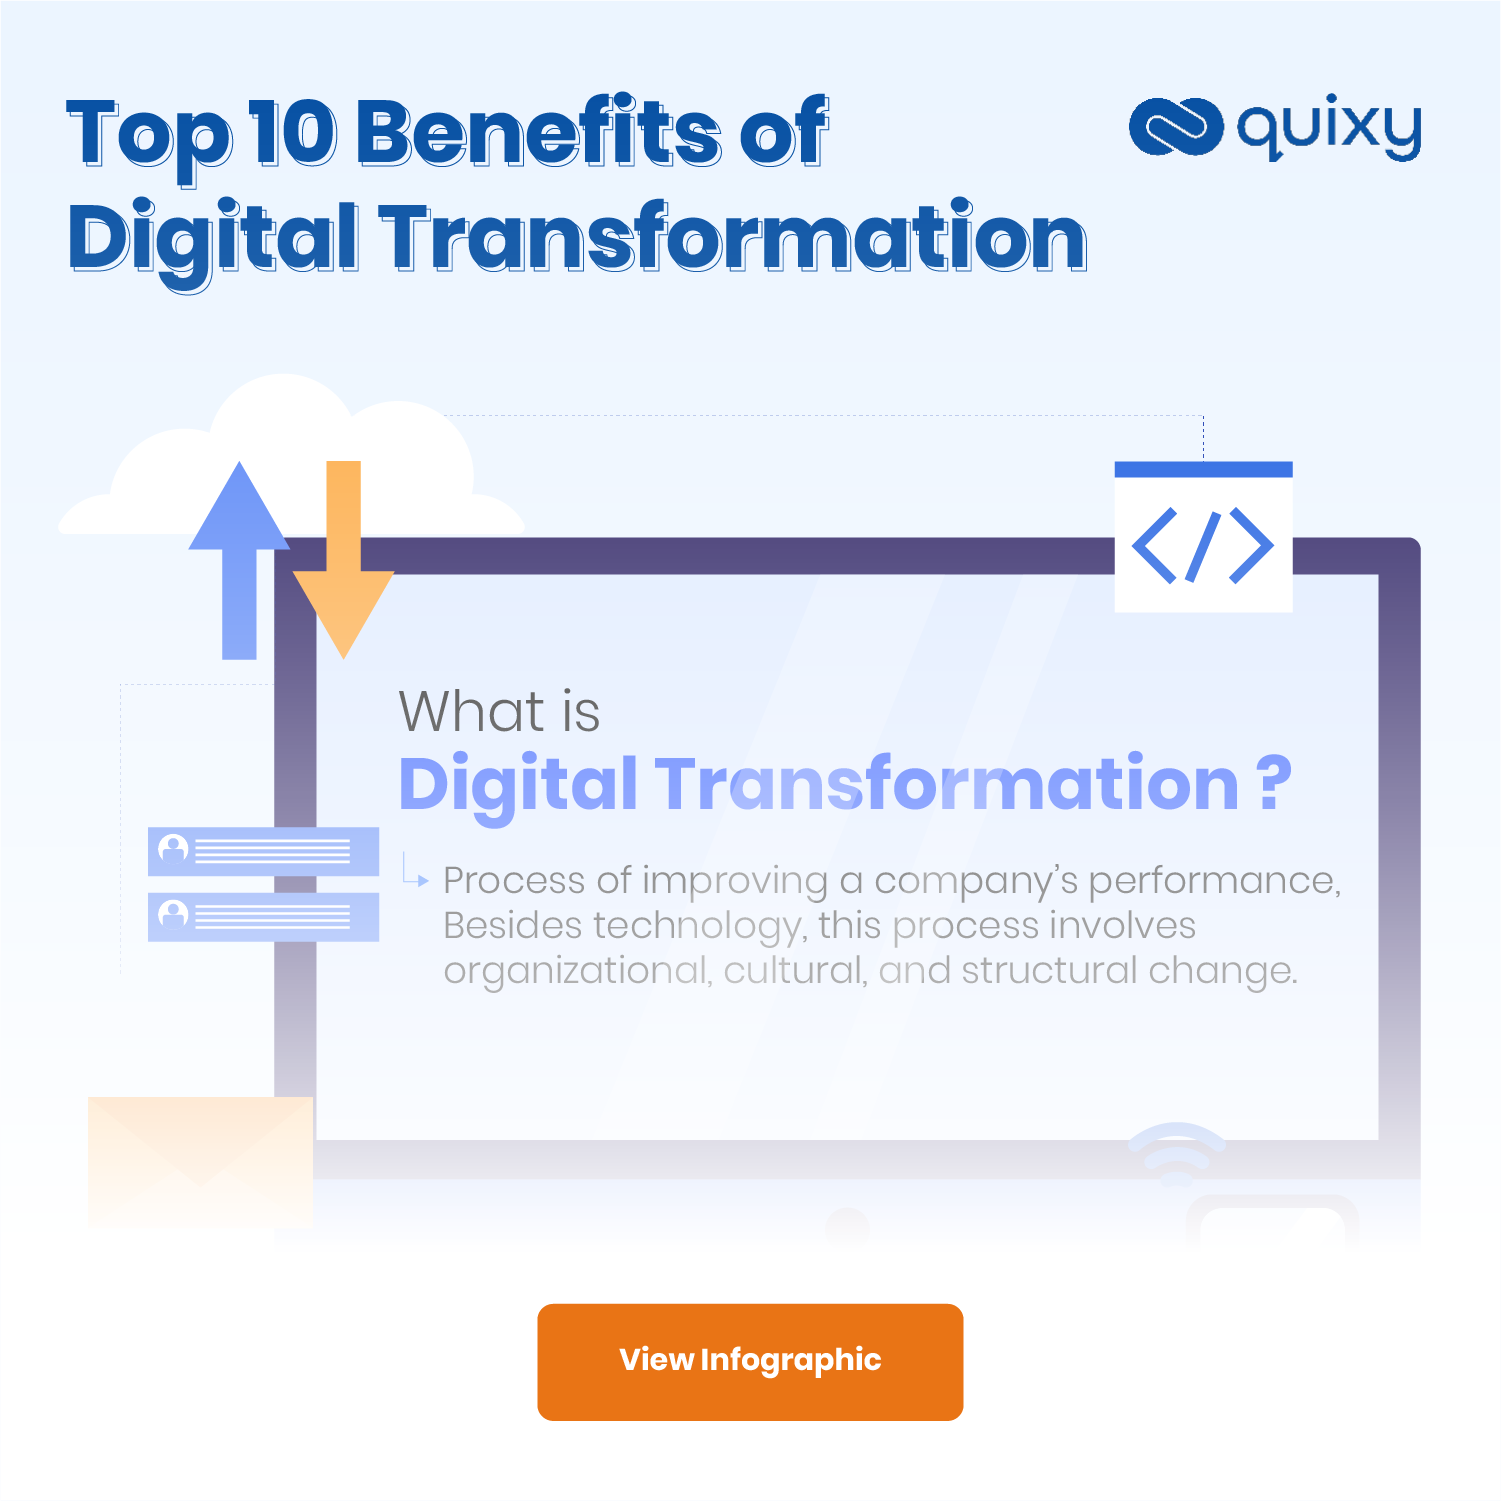 Top 10 Benefits of Digital Transformation Infographic